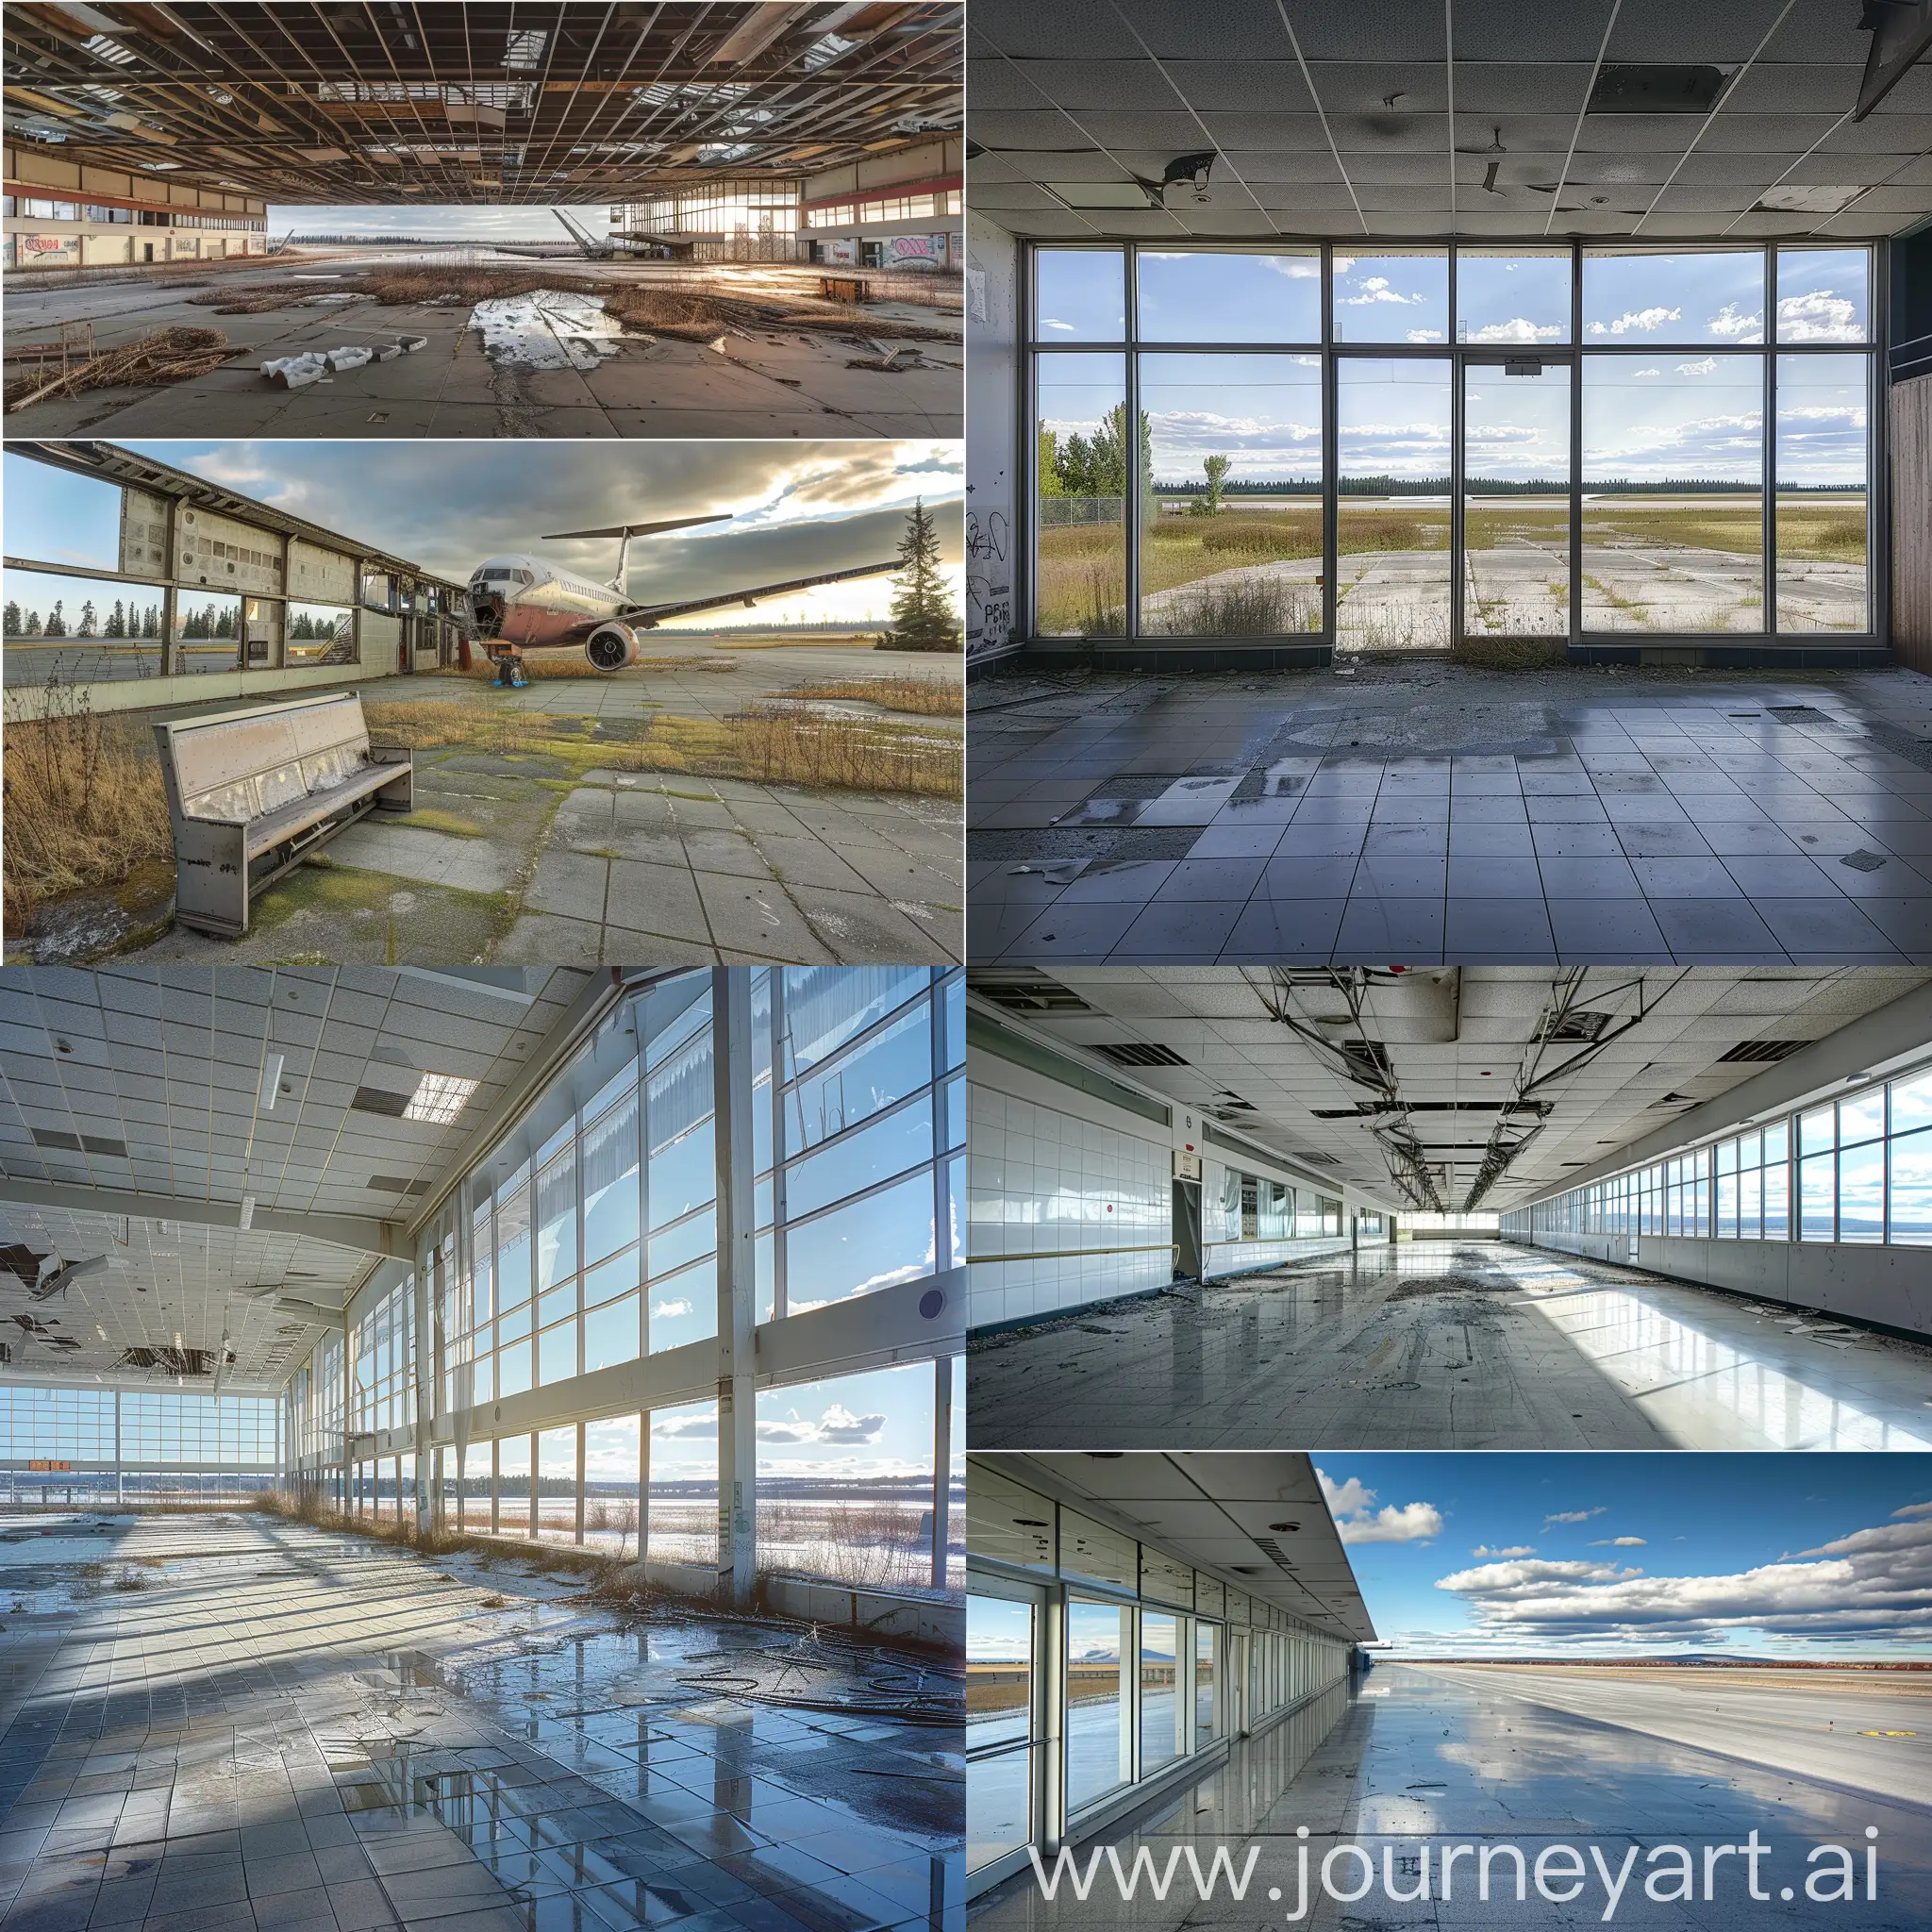 An abandoned airport in Canada, some pictures of the interiors, and an external panoramic view. Realistic daytime